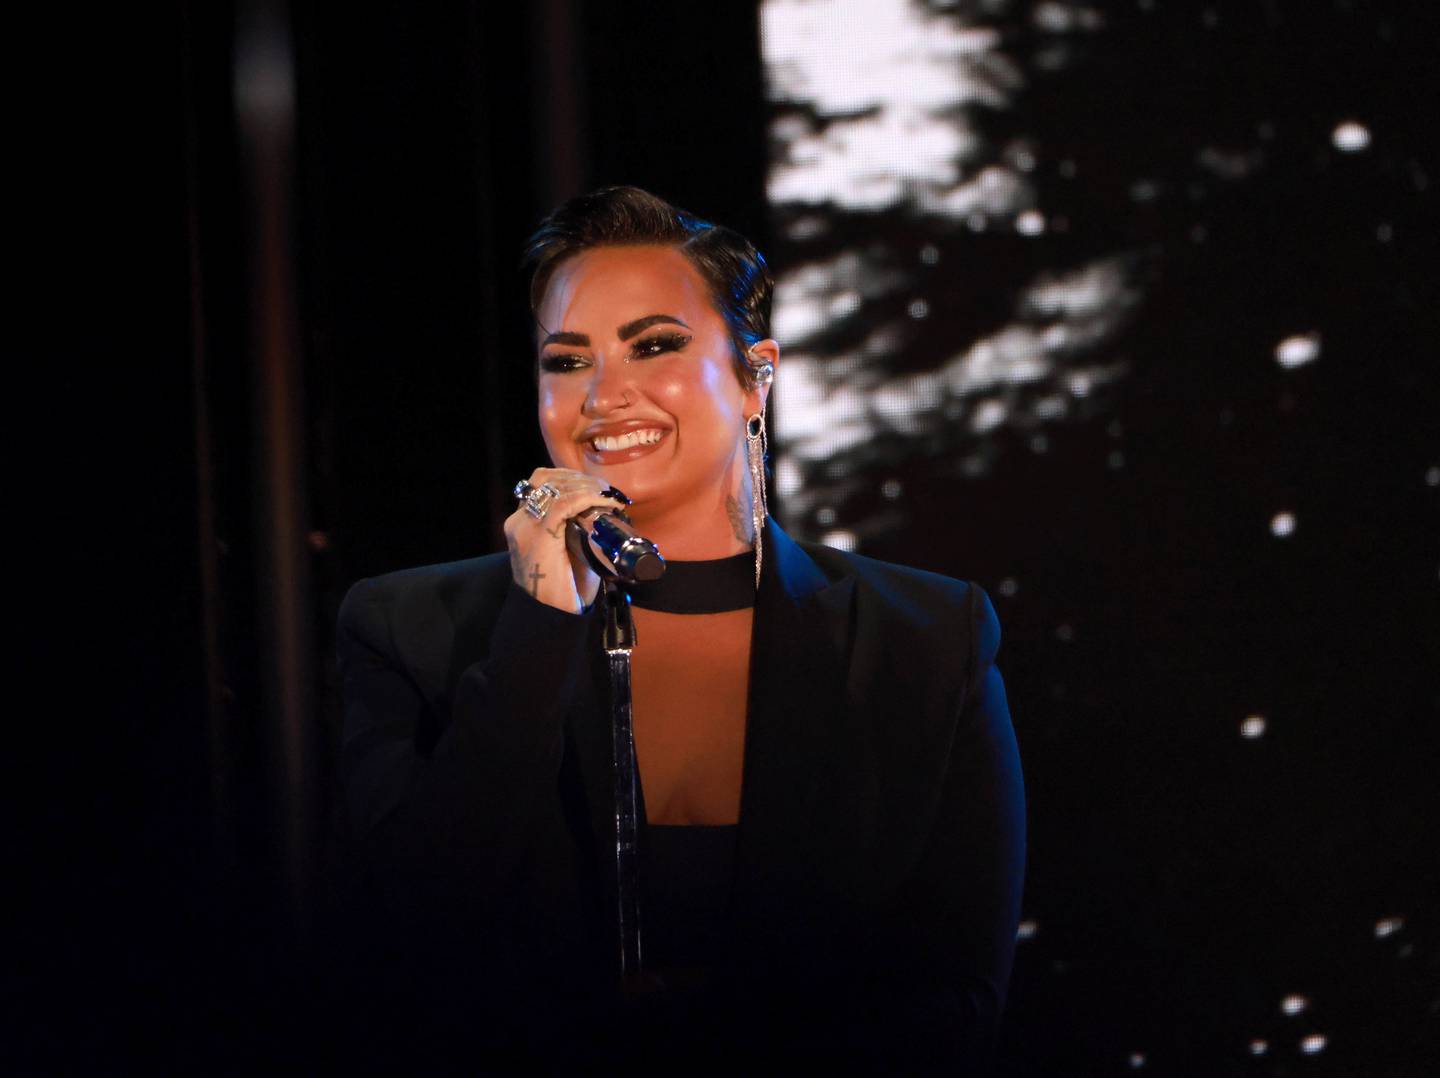 Demi Lovato is performing at the Coca-Cola Arena on Saturday. Reuters